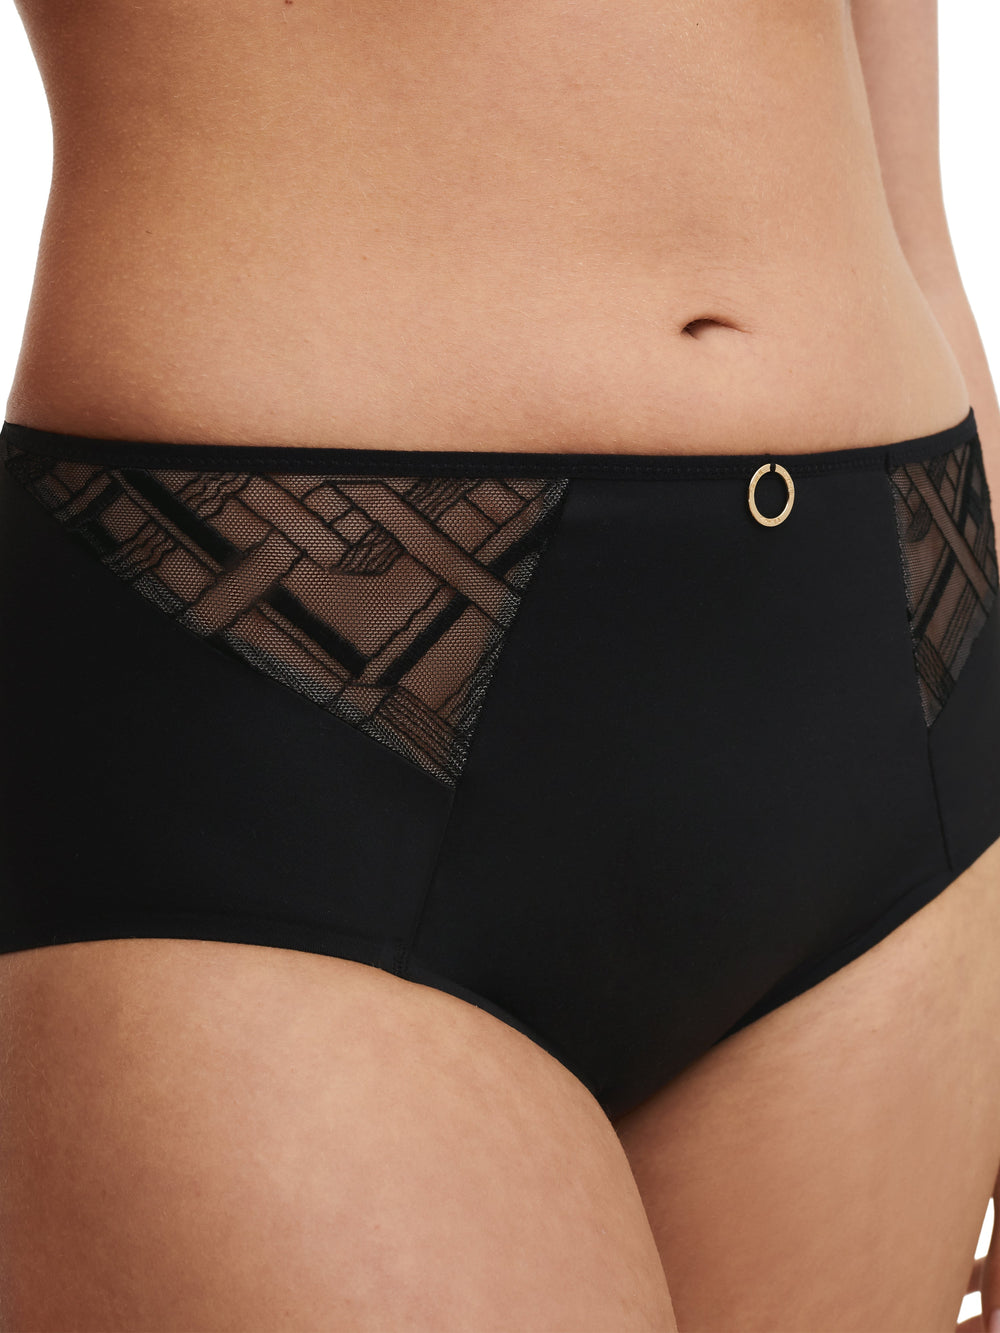 Chantelle - Graphic Support High Waisted Support Full Brief Schwarzer Full Brief Chantelle